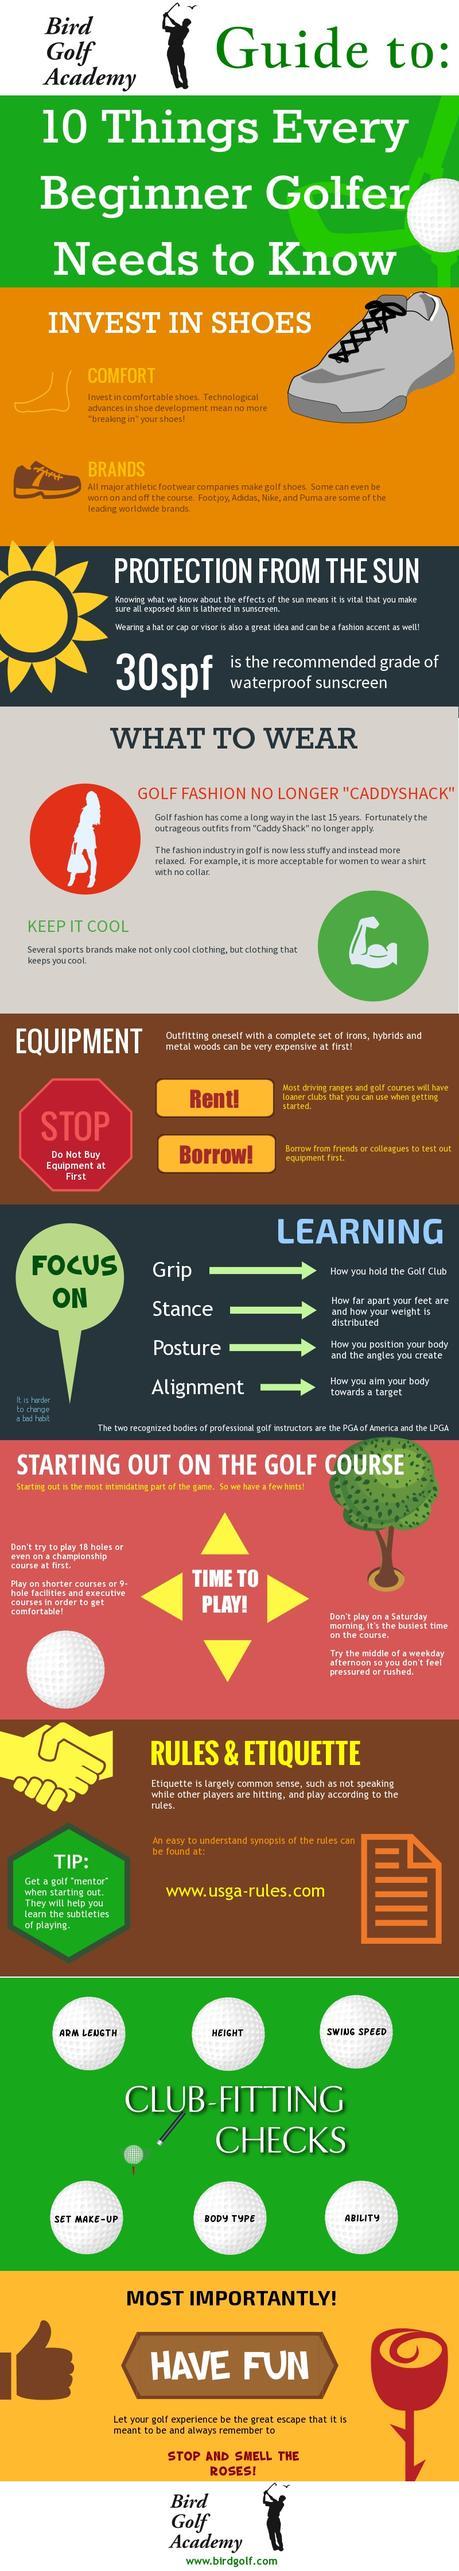 10 Things Every Beginner Golfer Needs to Know #Golf #Infographic